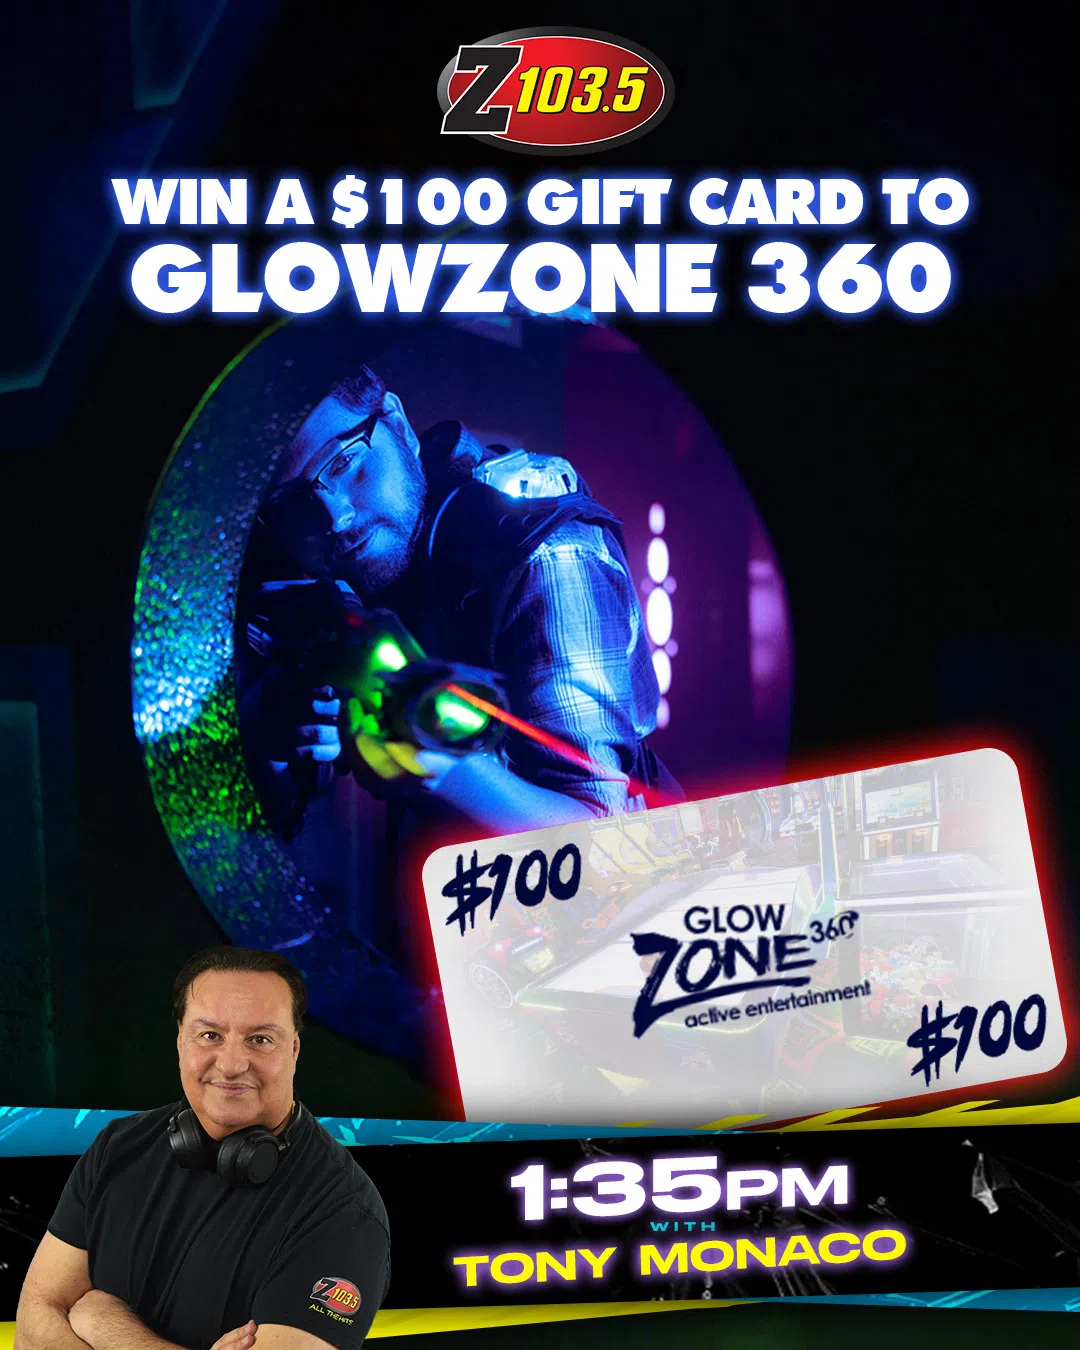 Feature: https://z1035.com/win/win-a-night-out-to-glow-zone/